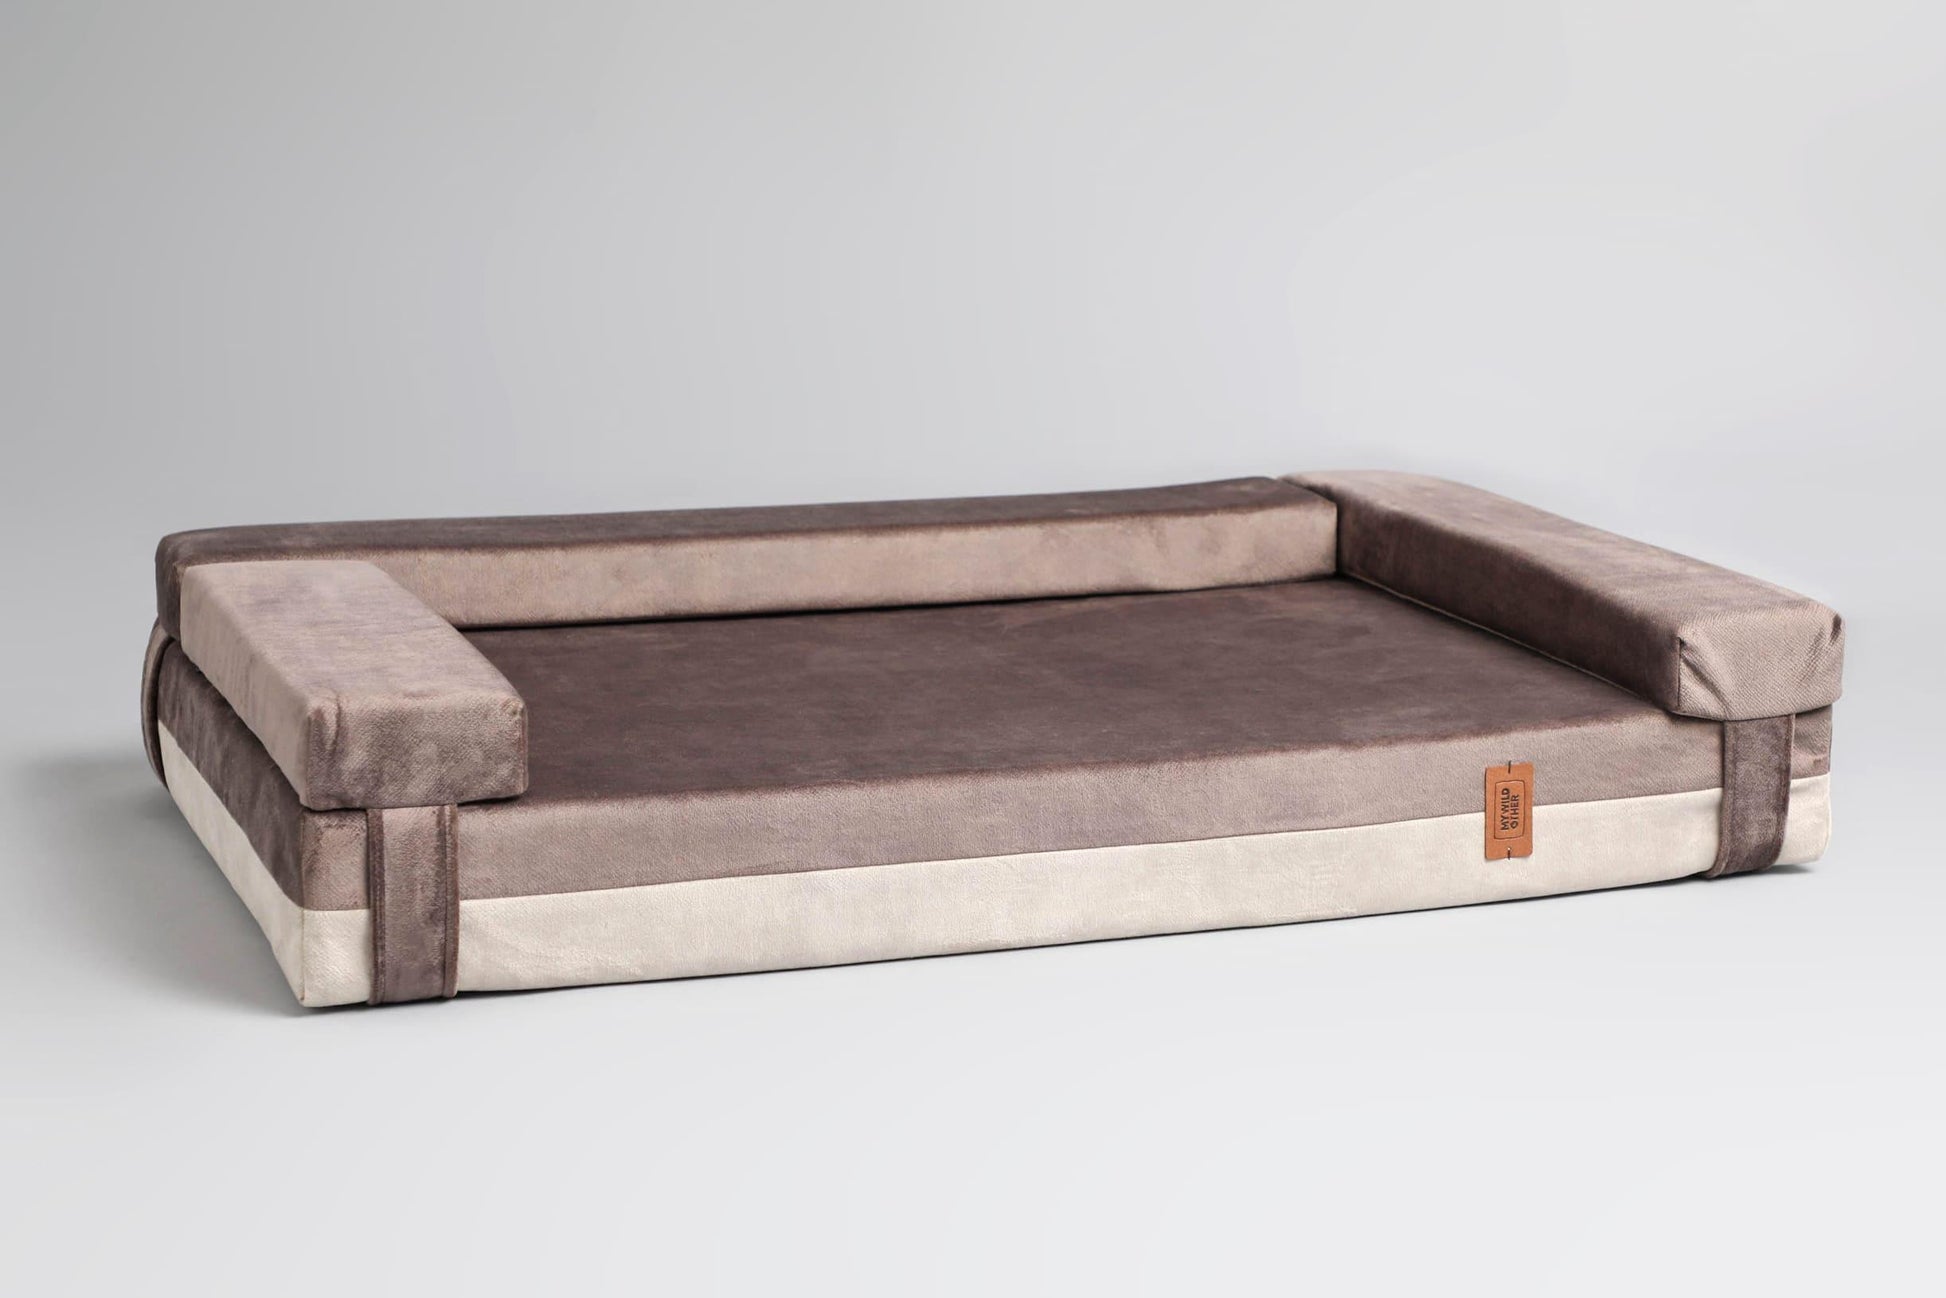 Transformer dog bed | Extra comfort & support | 2-sided | BEIGE+TAUPE - premium dog goods handmade in Europe by My Wild Other